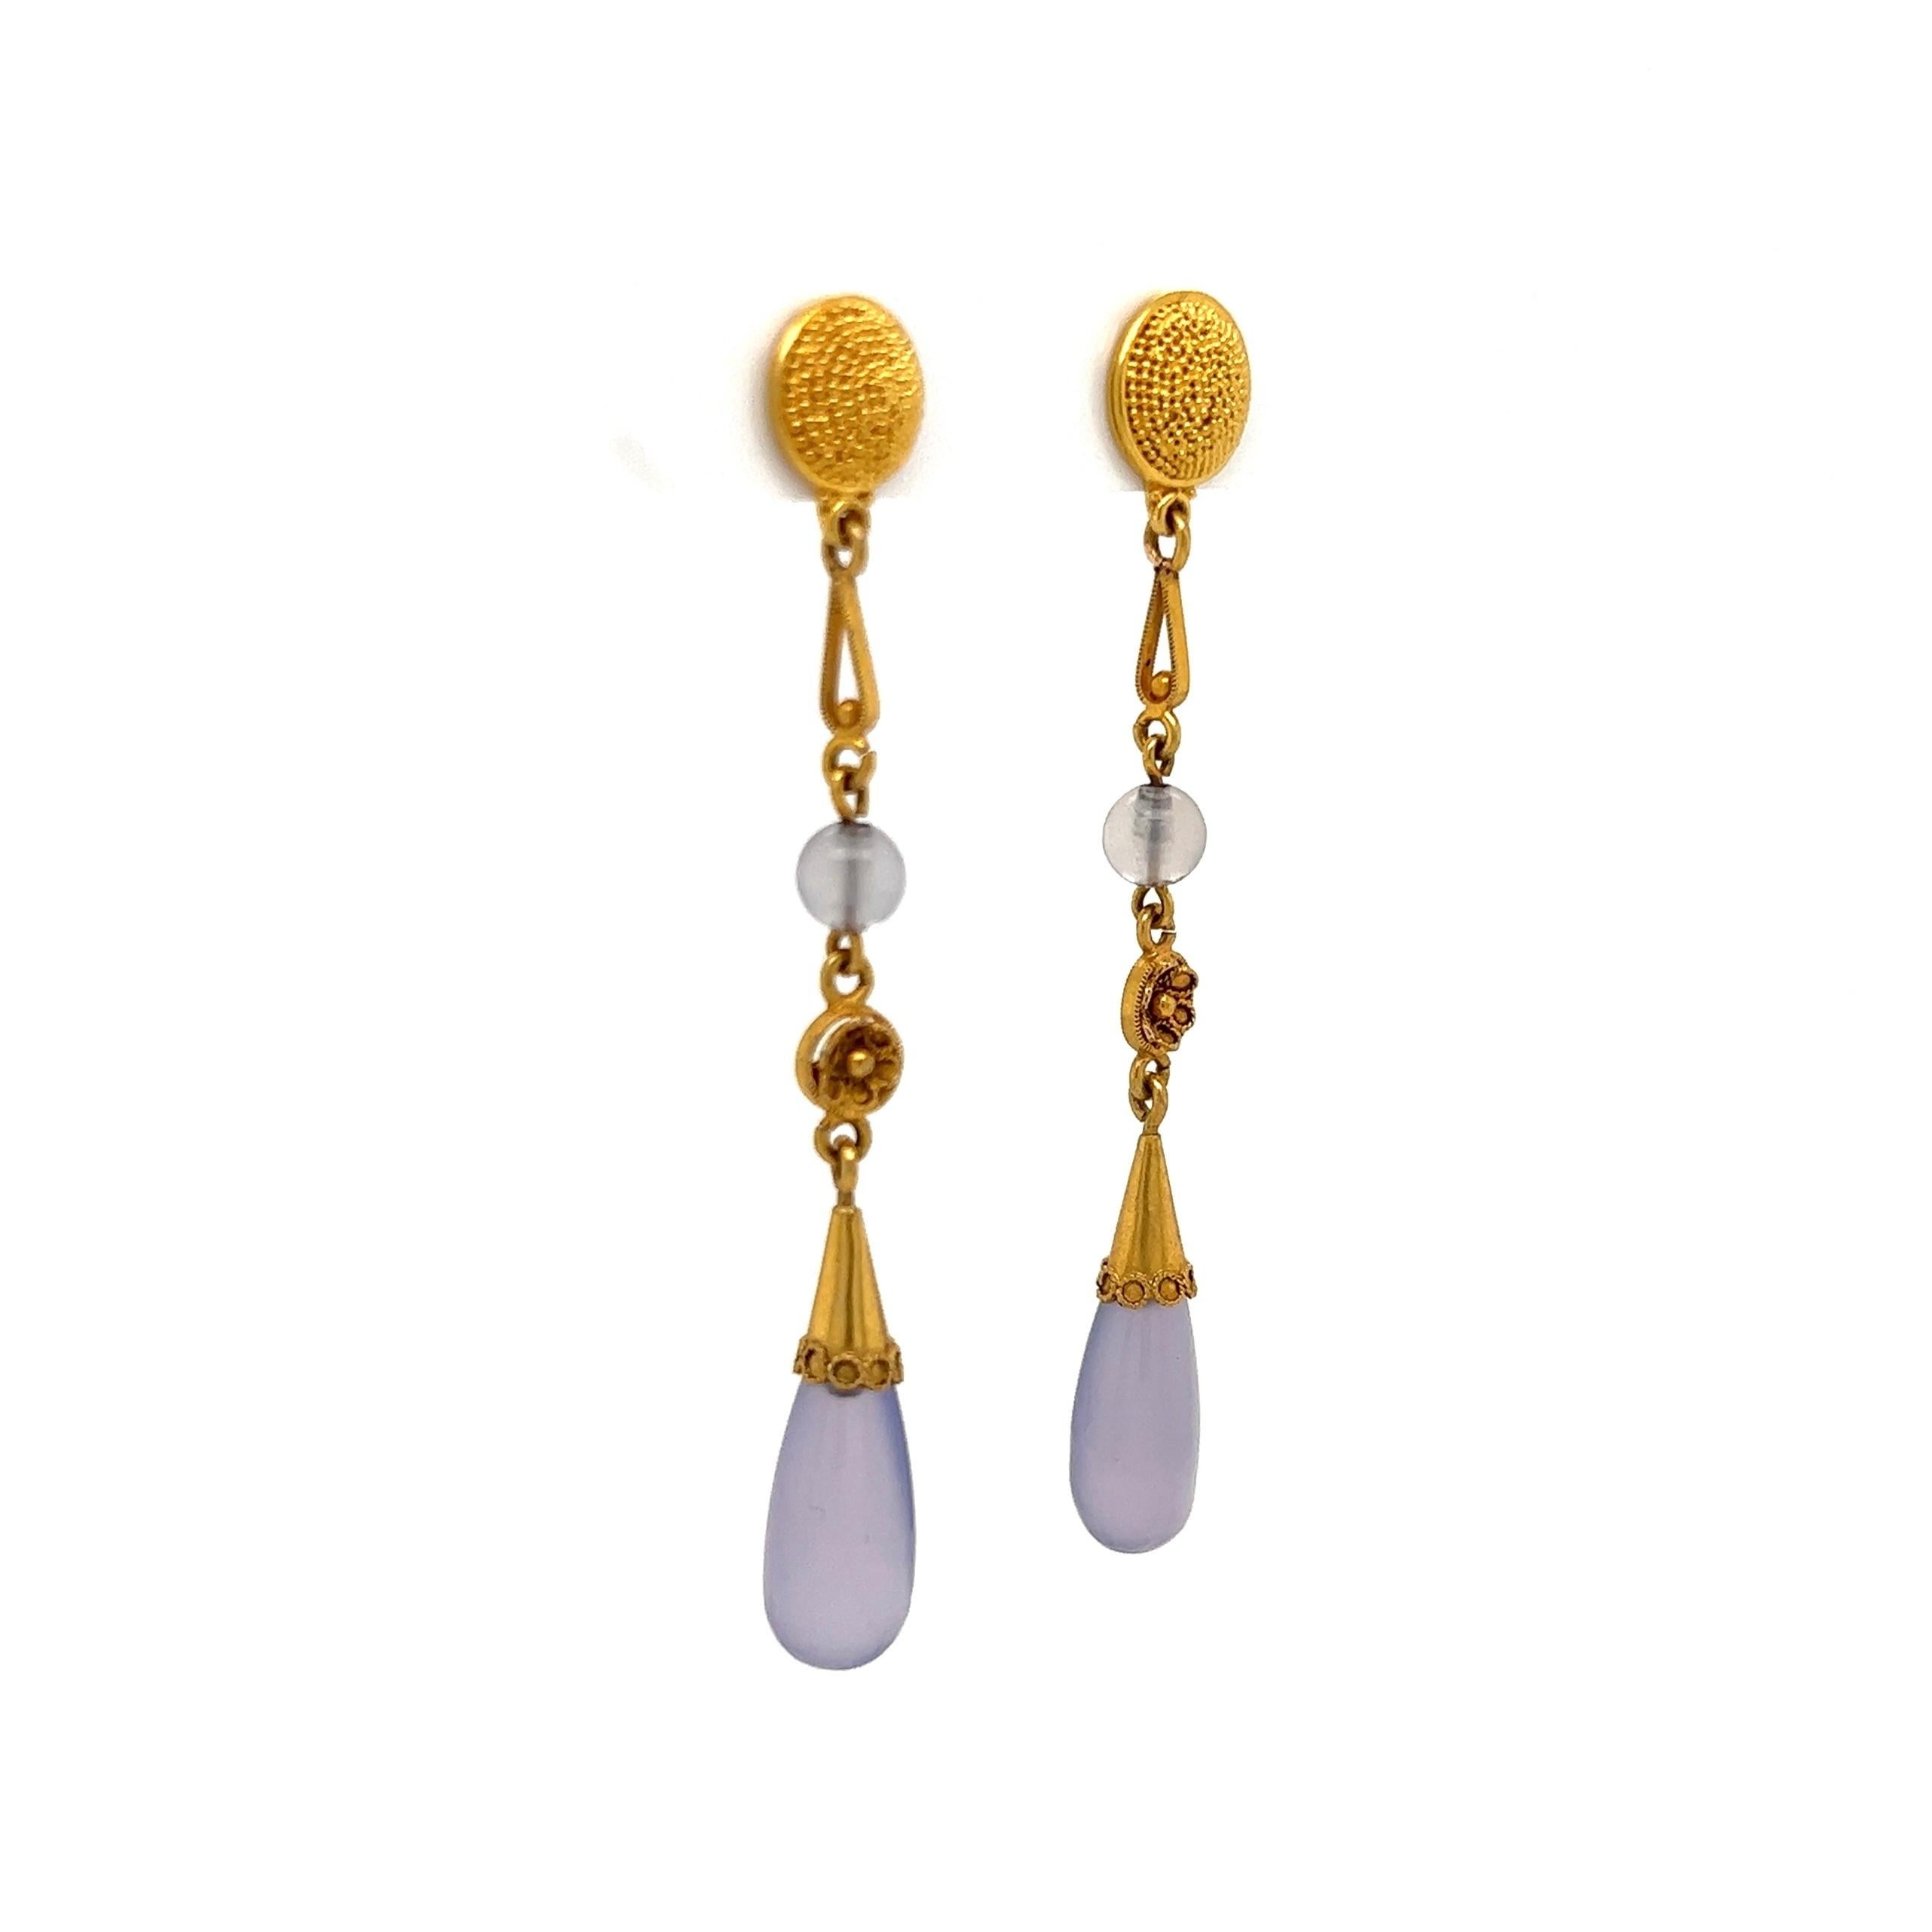 Simply Beautiful! Purple Chalcedony Drop Earrings. Hand crafted 18K Yellow Gold mounting. Earrings measure approx. 2” long. The earrings are in excellent condition and were recently professionally cleaned and polished. More Beautiful in real time!